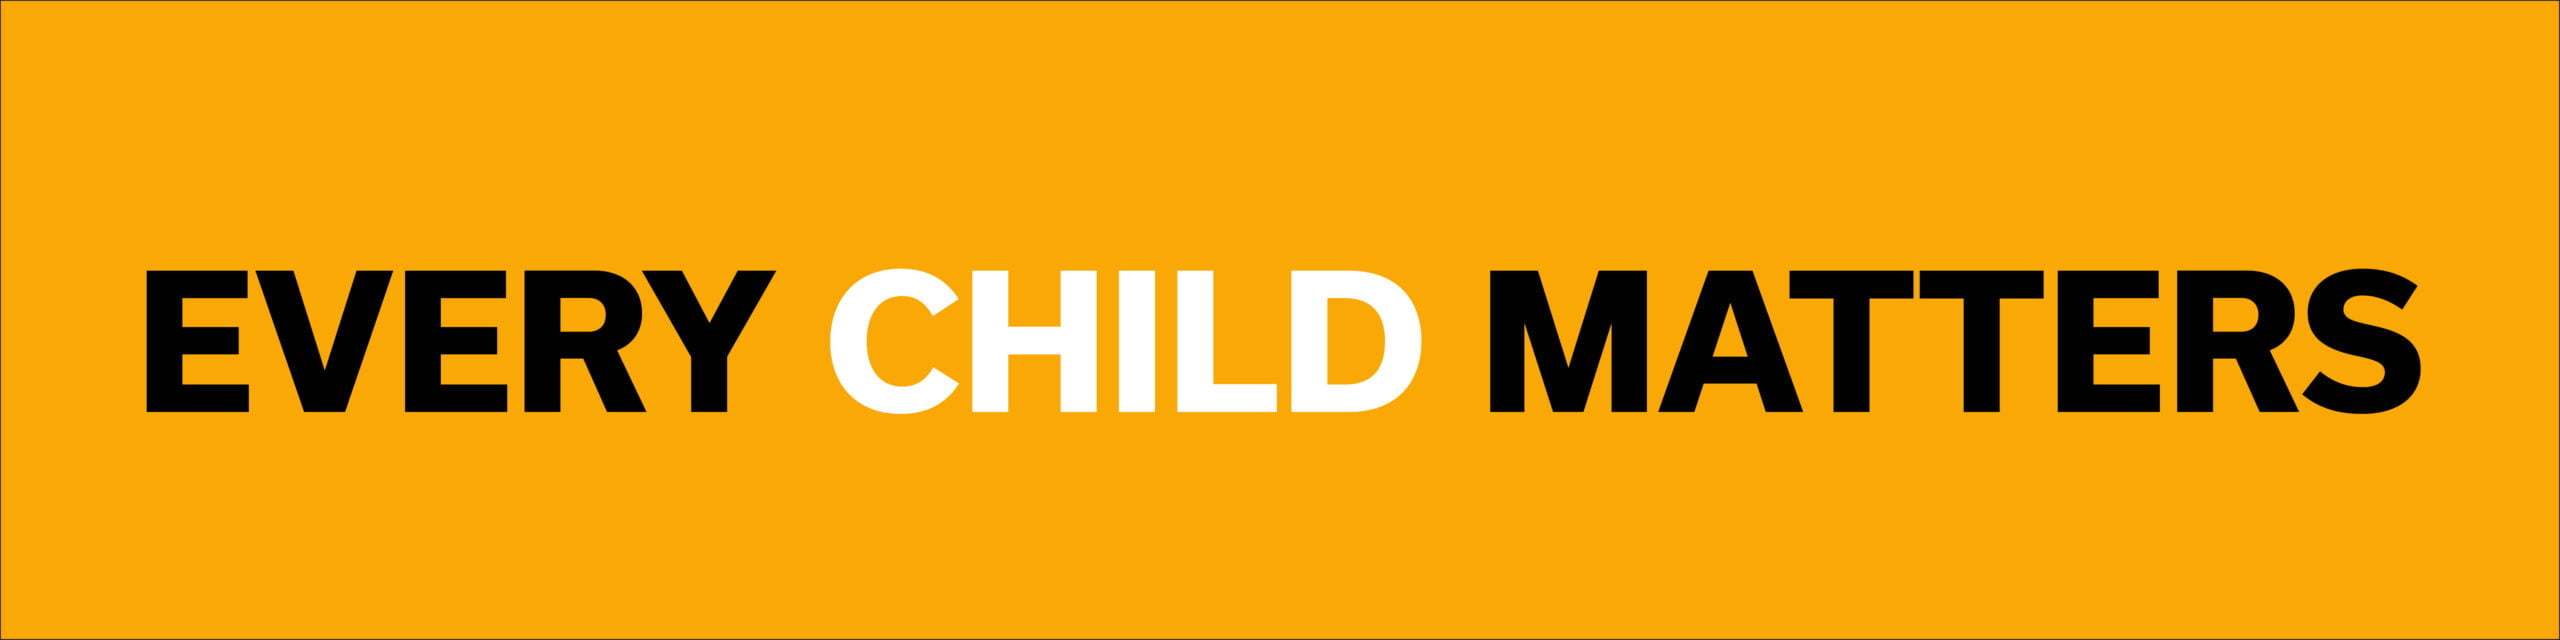 Every Child Matters banner